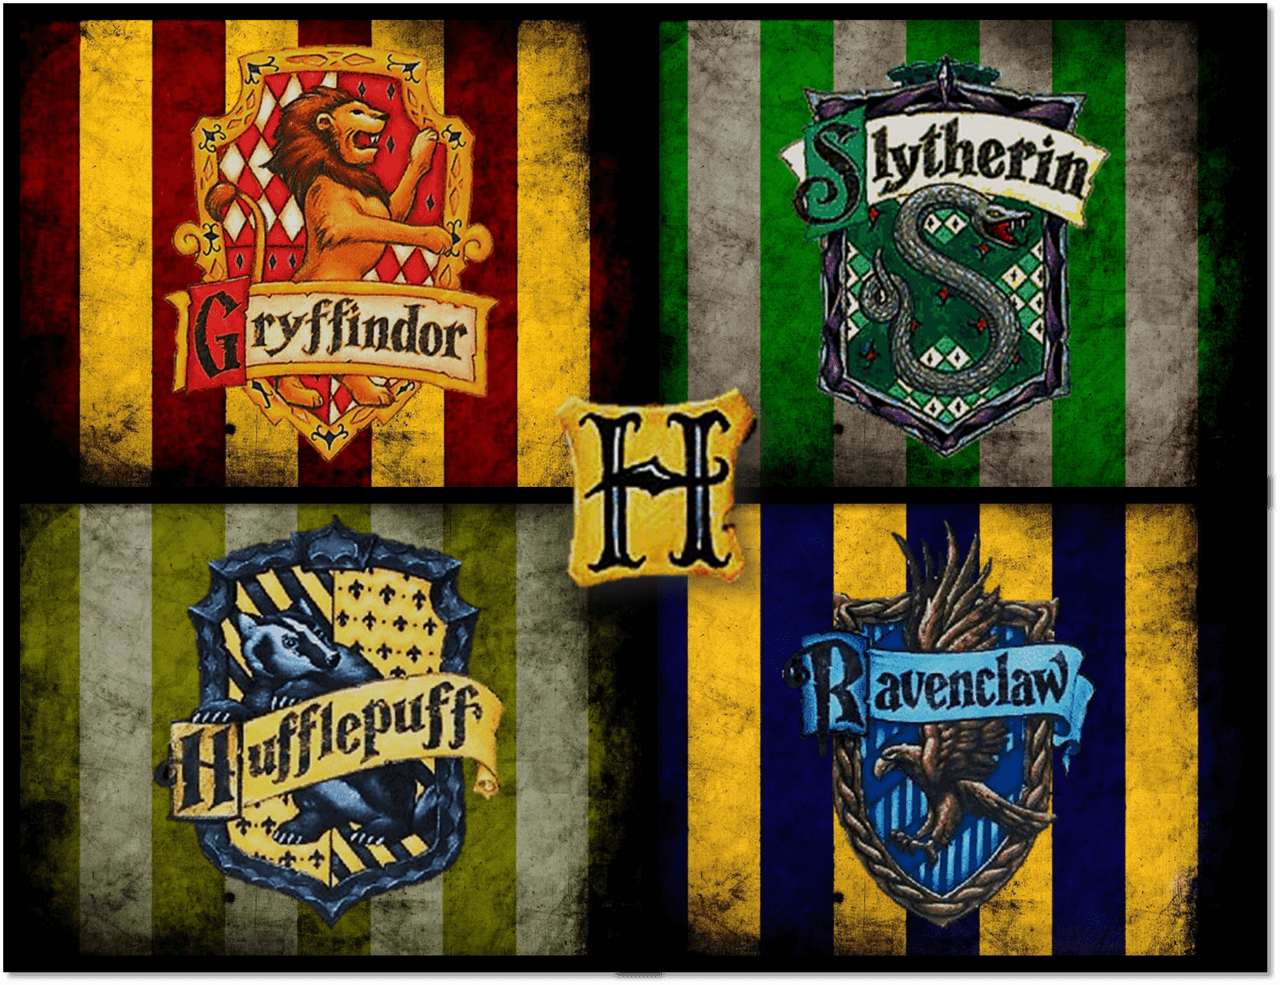 Which Hogwarts House from Harry Potter do you belong to